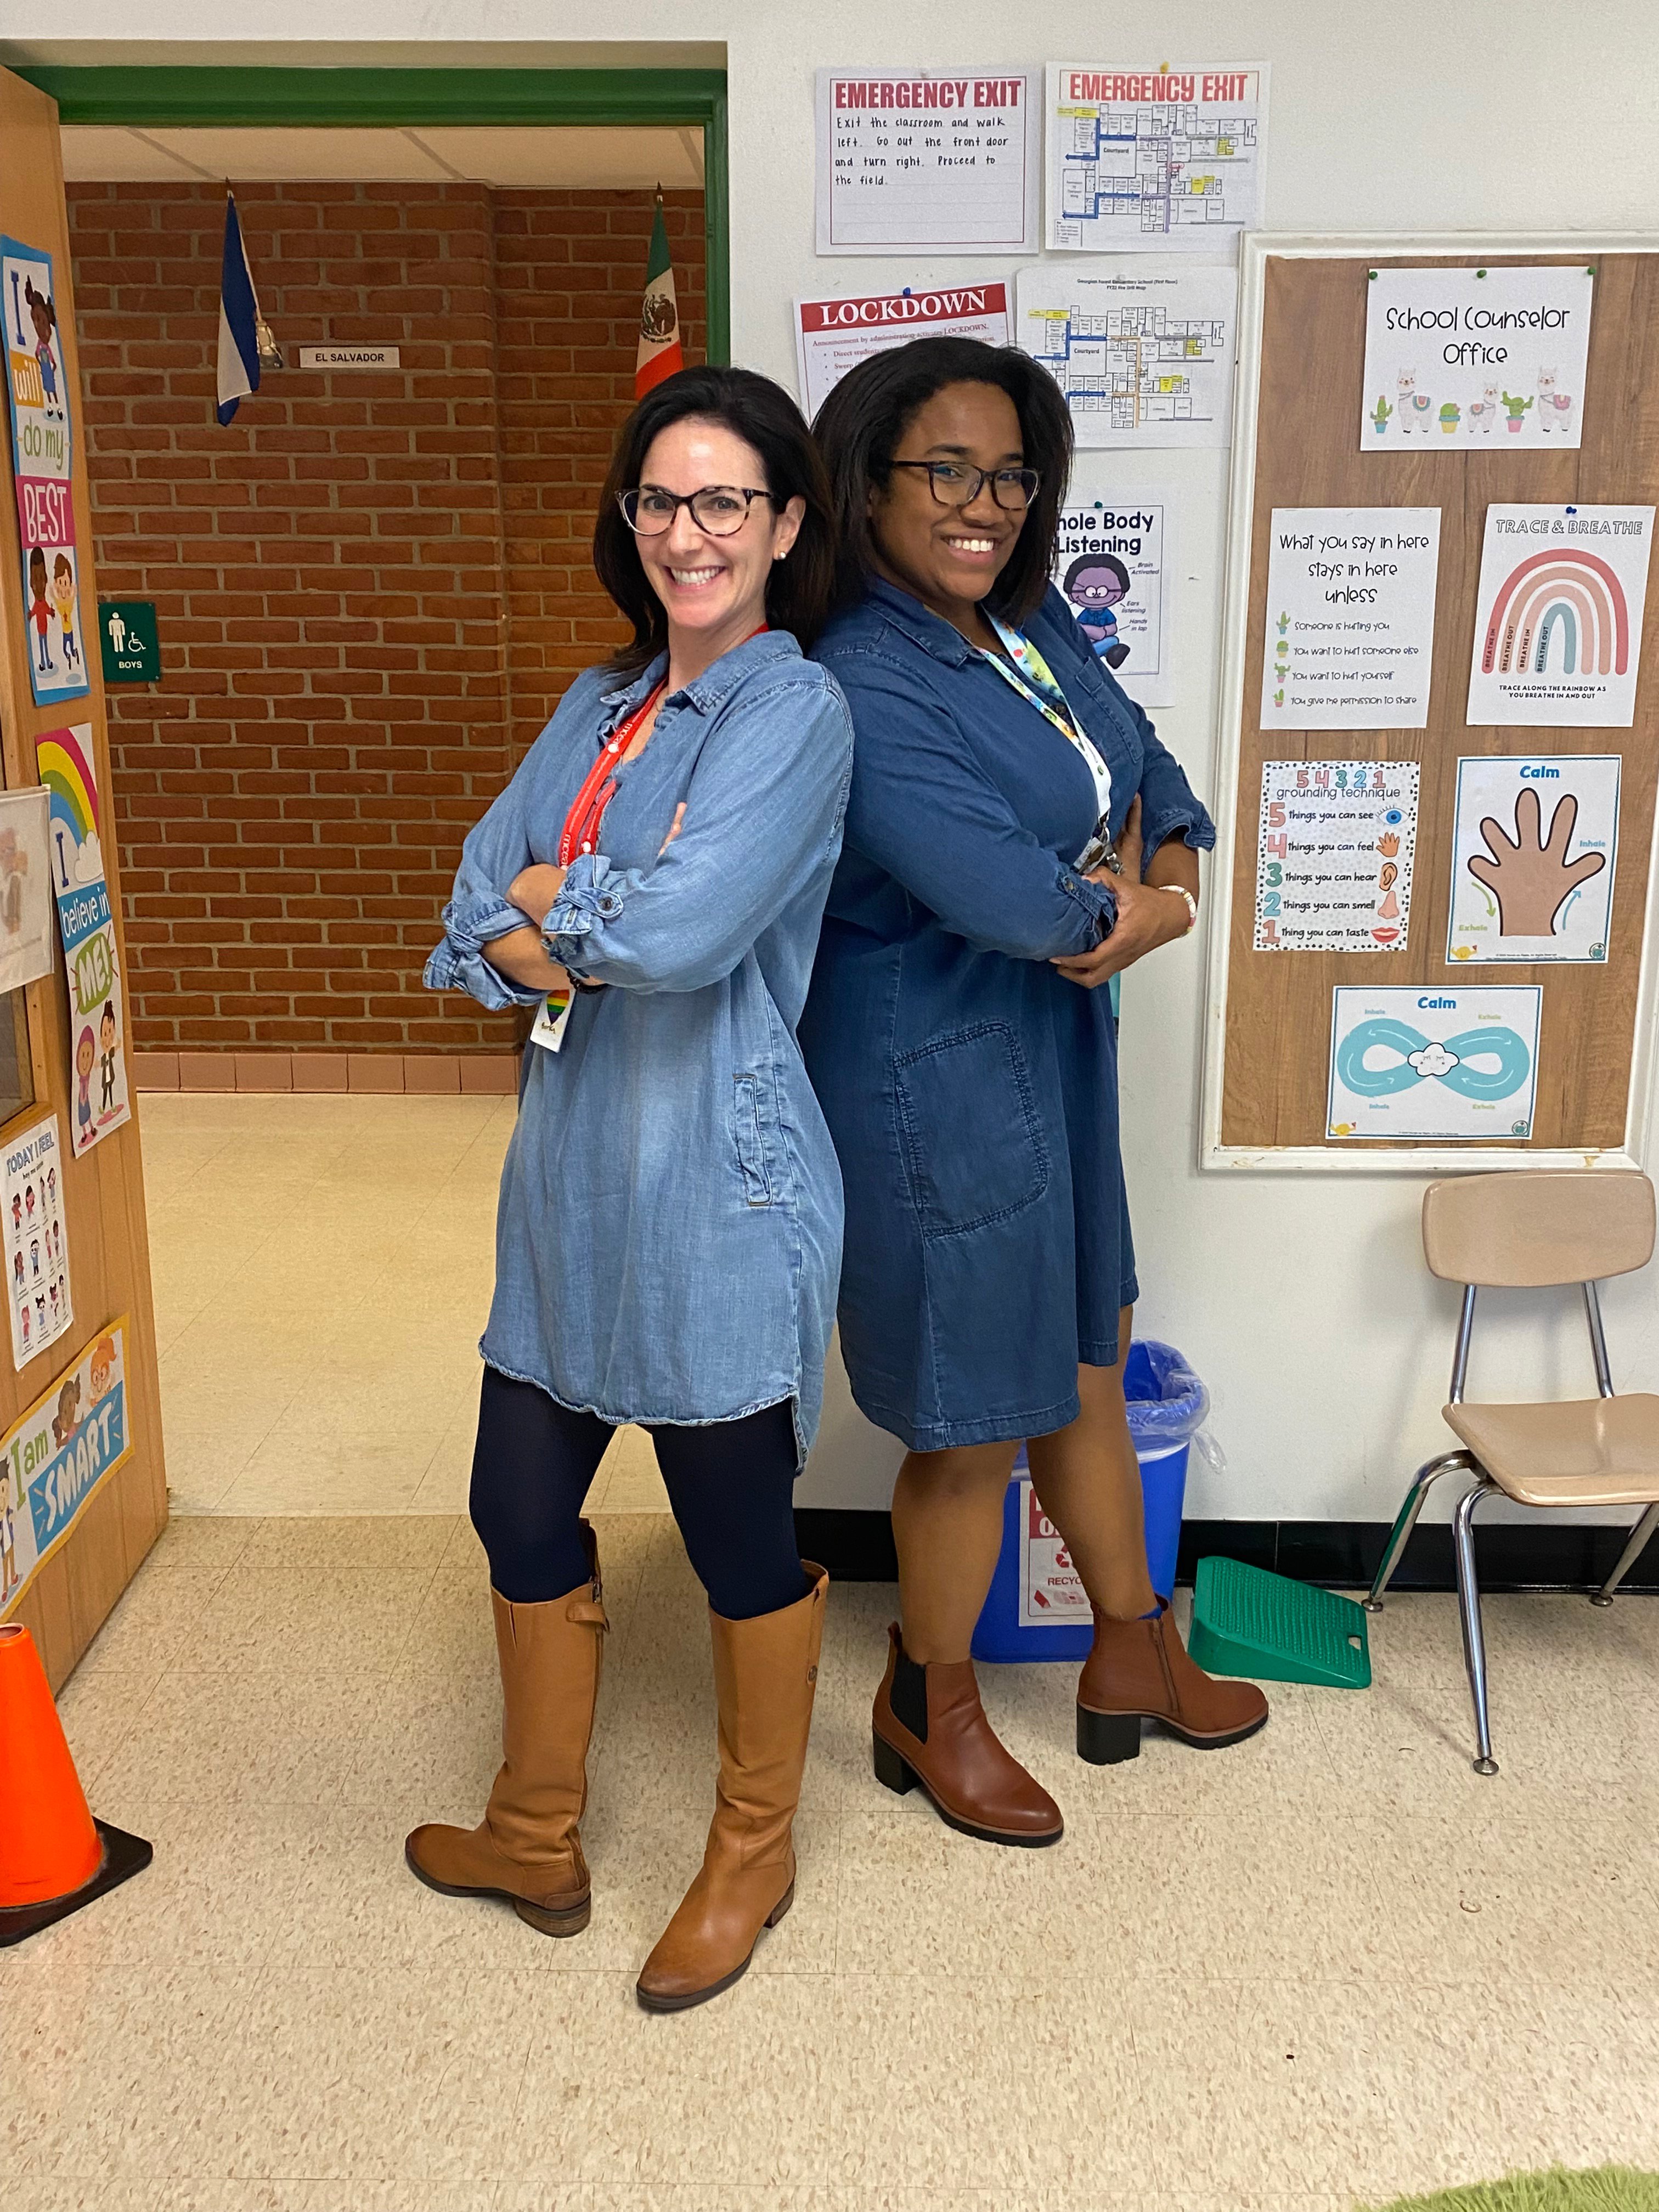 Our awesome counselors, Ms. Borkin and Ms. Joseph!